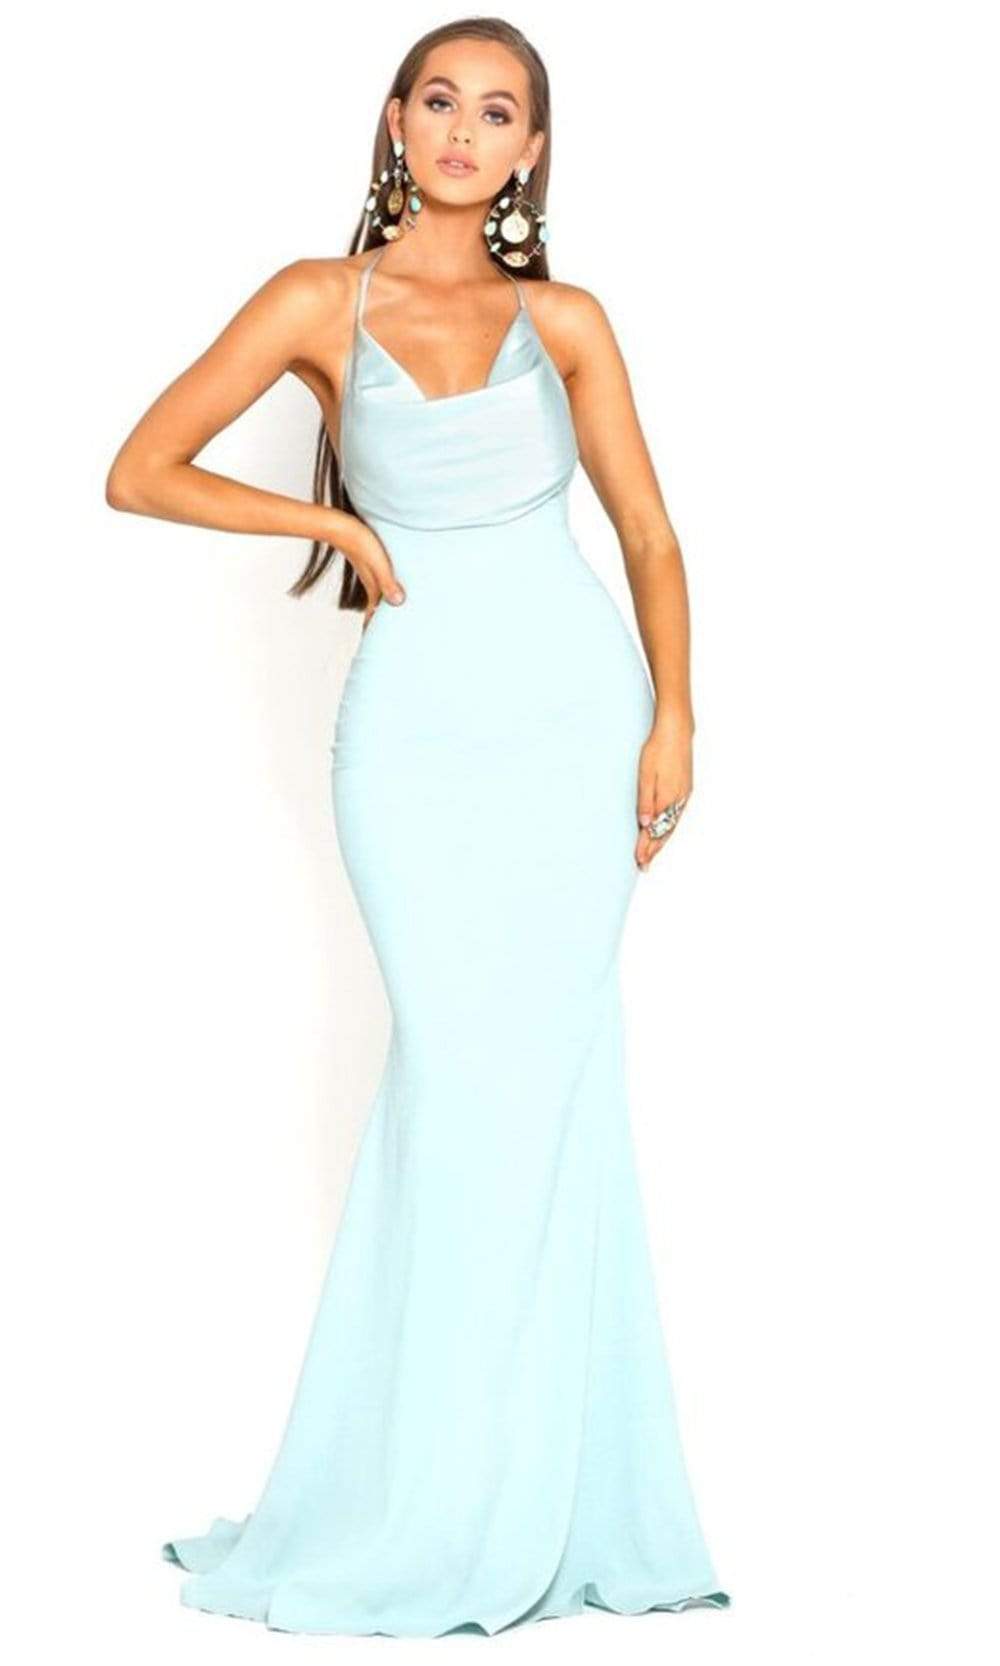 Portia and Scarlett - PS1911 Halter Cowl Neckline Mermaid Gown Prom Dresses 0 / Mint